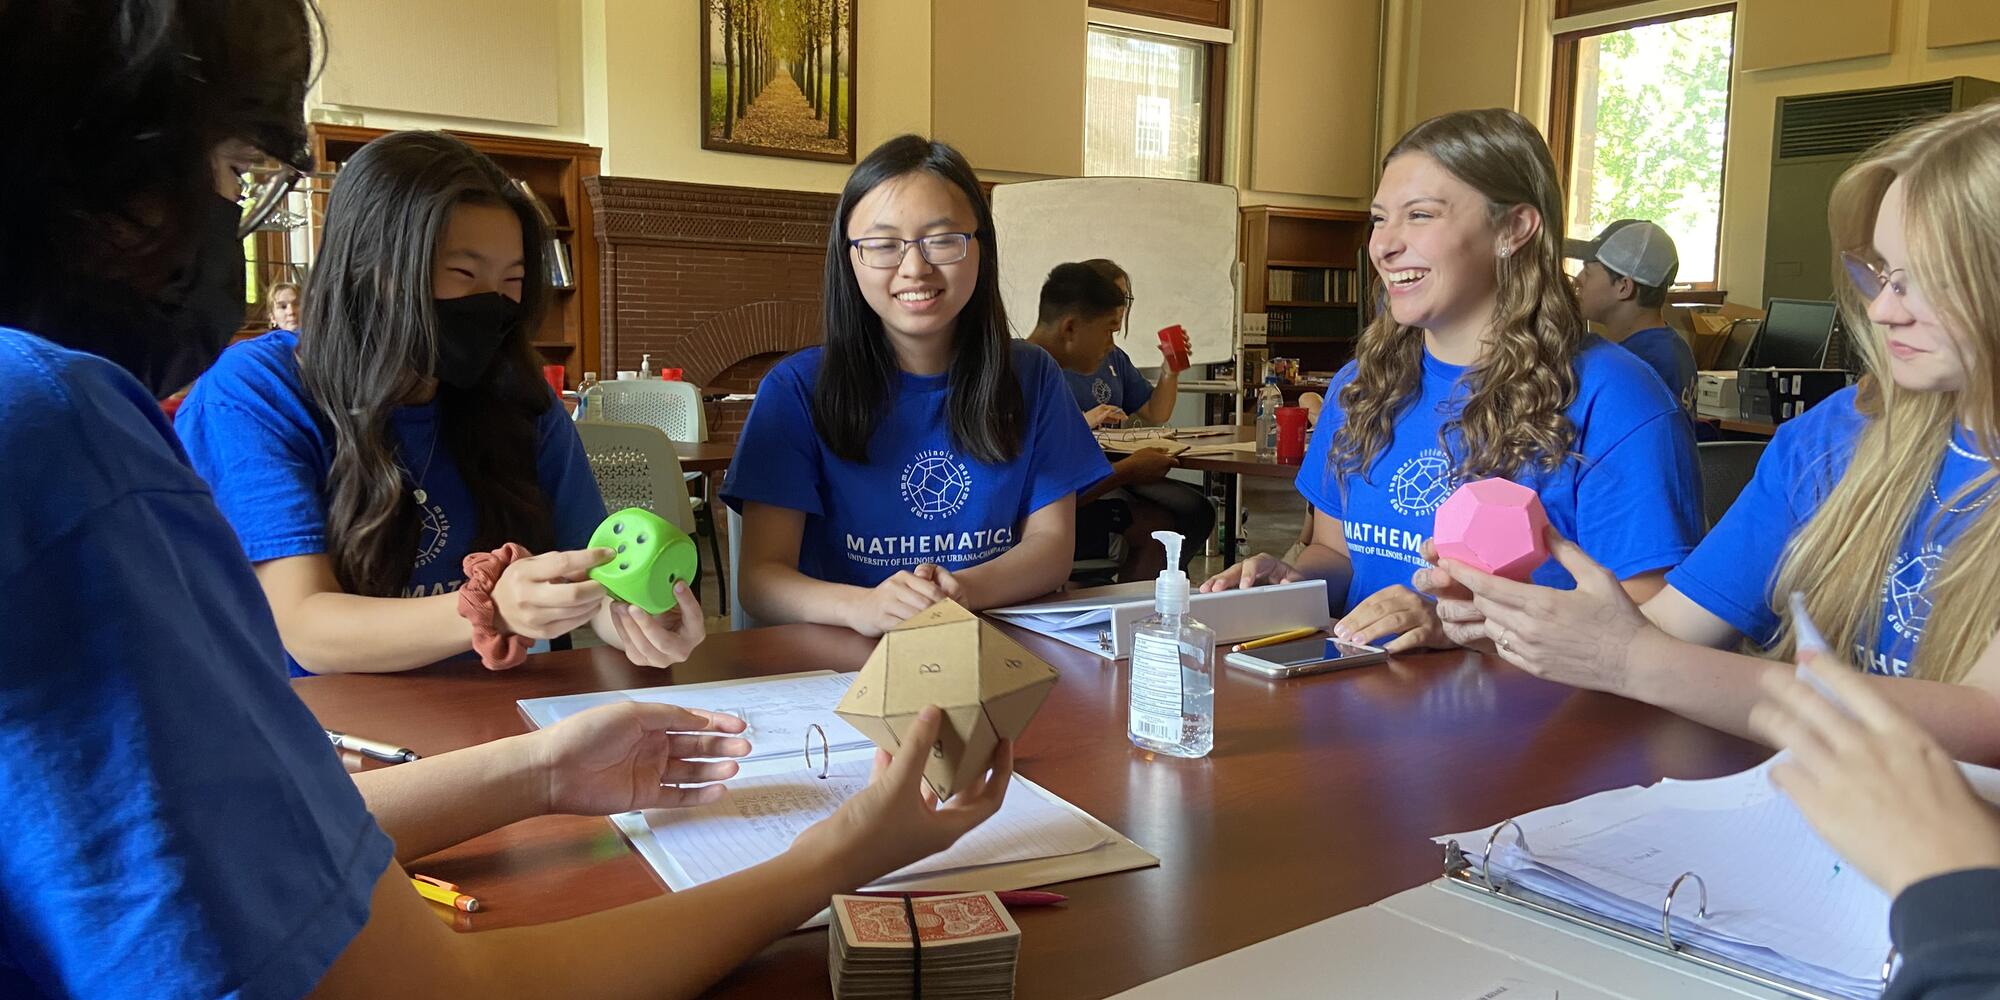 A group of students sit around a table smiling. Two are holding mathematical models. 